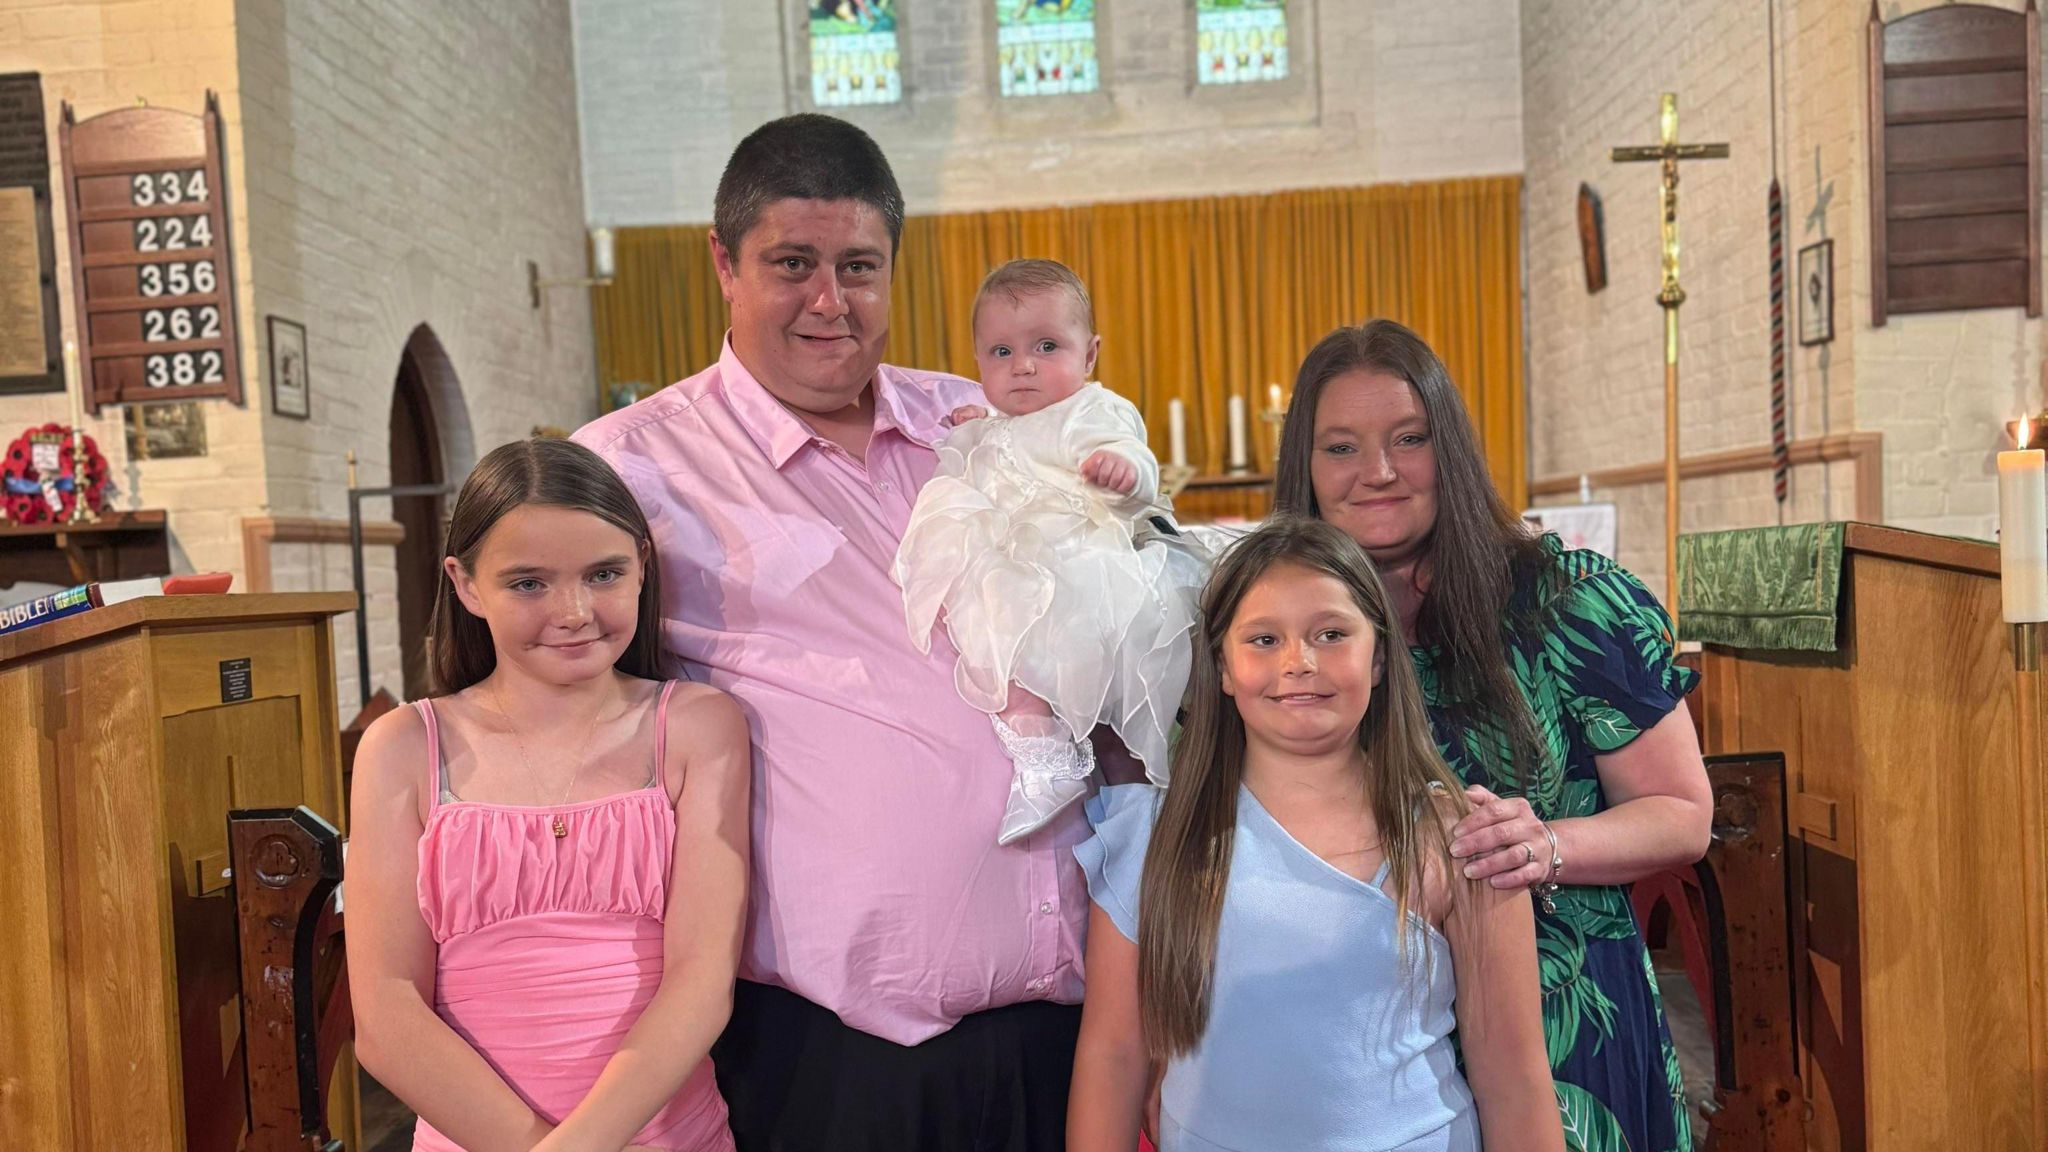 Dad Shaine Kirby holding baby Paighton in the church with mum Elizabeth Lambert and siblings Lexi and Erin by his side